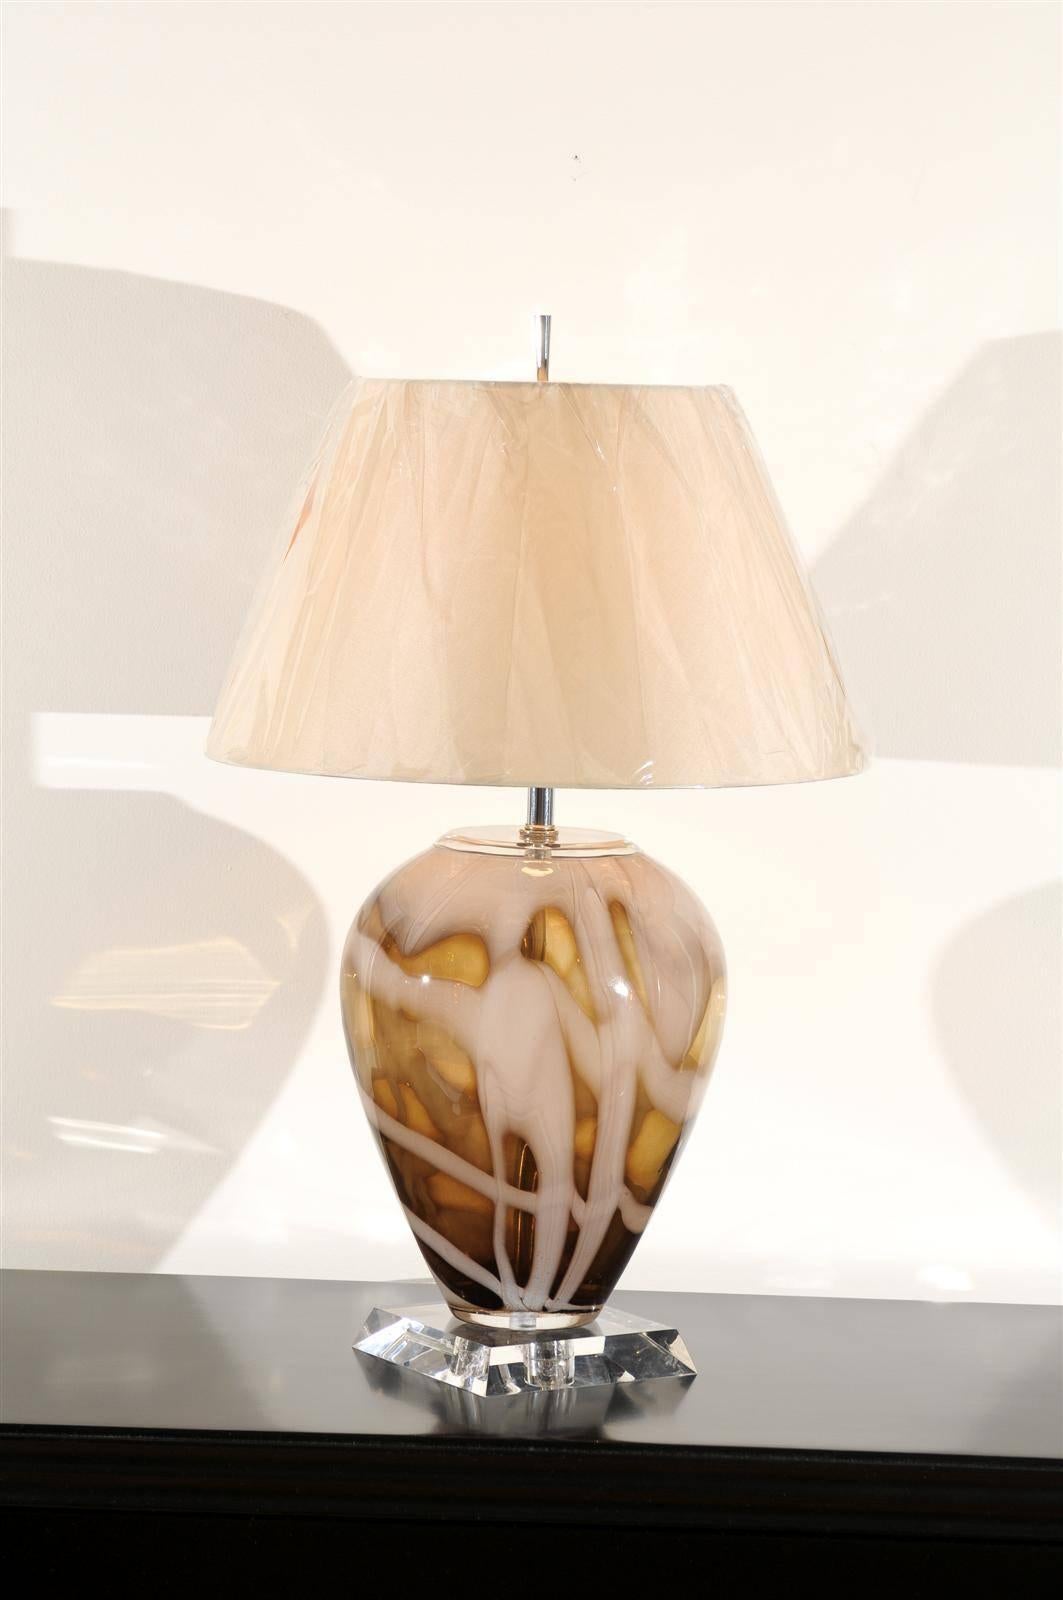 A beautiful pair of blown glass vessels as lamps. Fabulous form, scale and color. The pieces are consistent with Eastern European art glass production of the 1980s and 1990s. Exquisite jewelry! Excellent restored condition. Wired using clear cord;